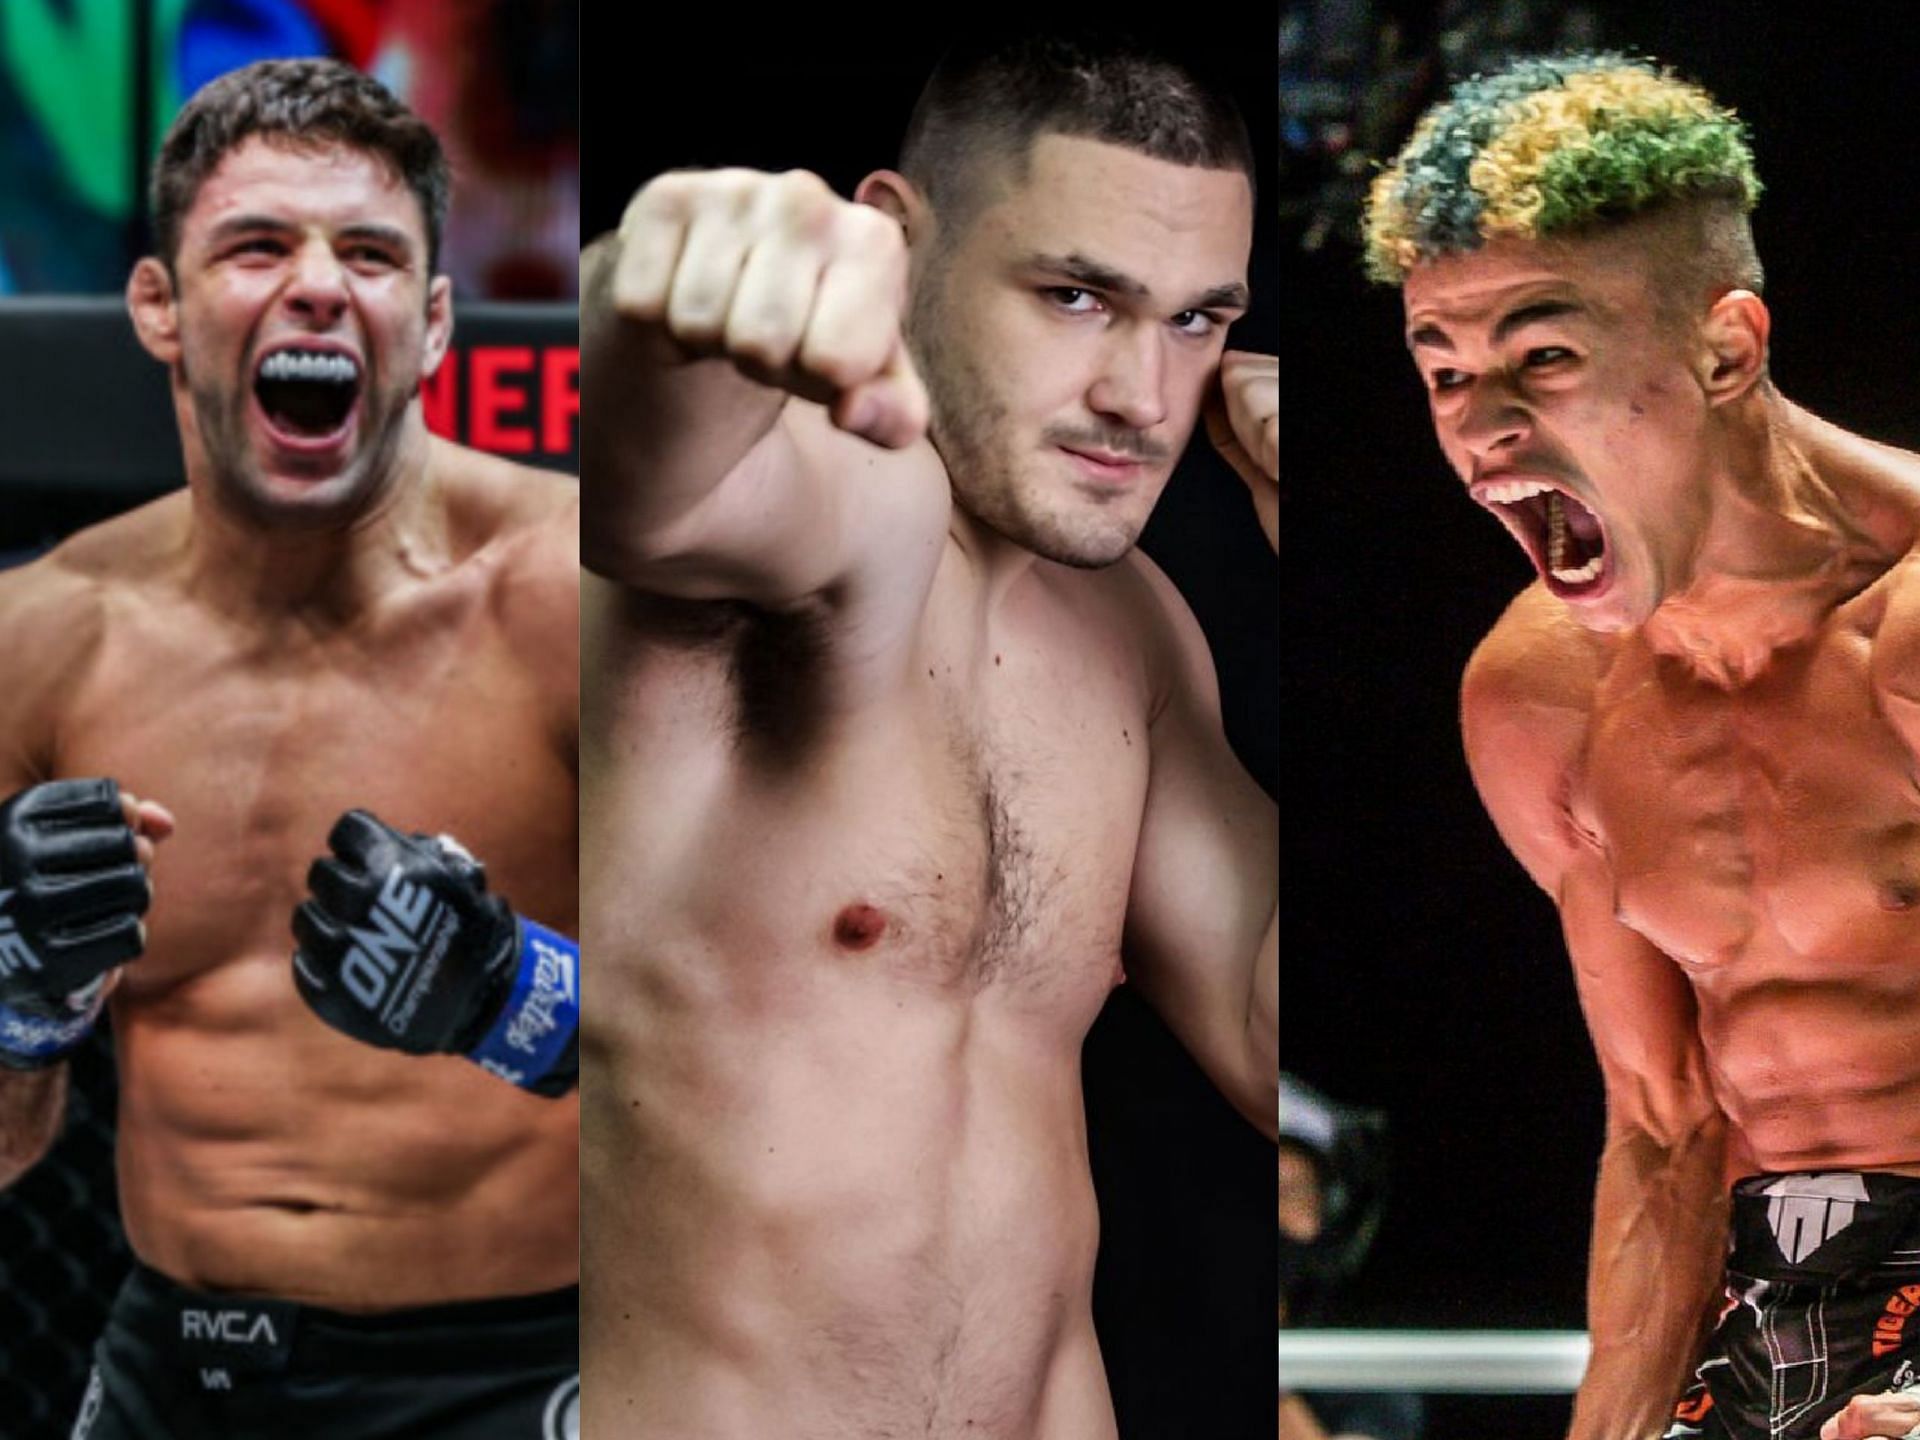 (From left) Marcus Almeida, Rade Opacic, and Fabricio Andrade are some of the stars who will grace ONE 158. [Photo: ONE Championship]